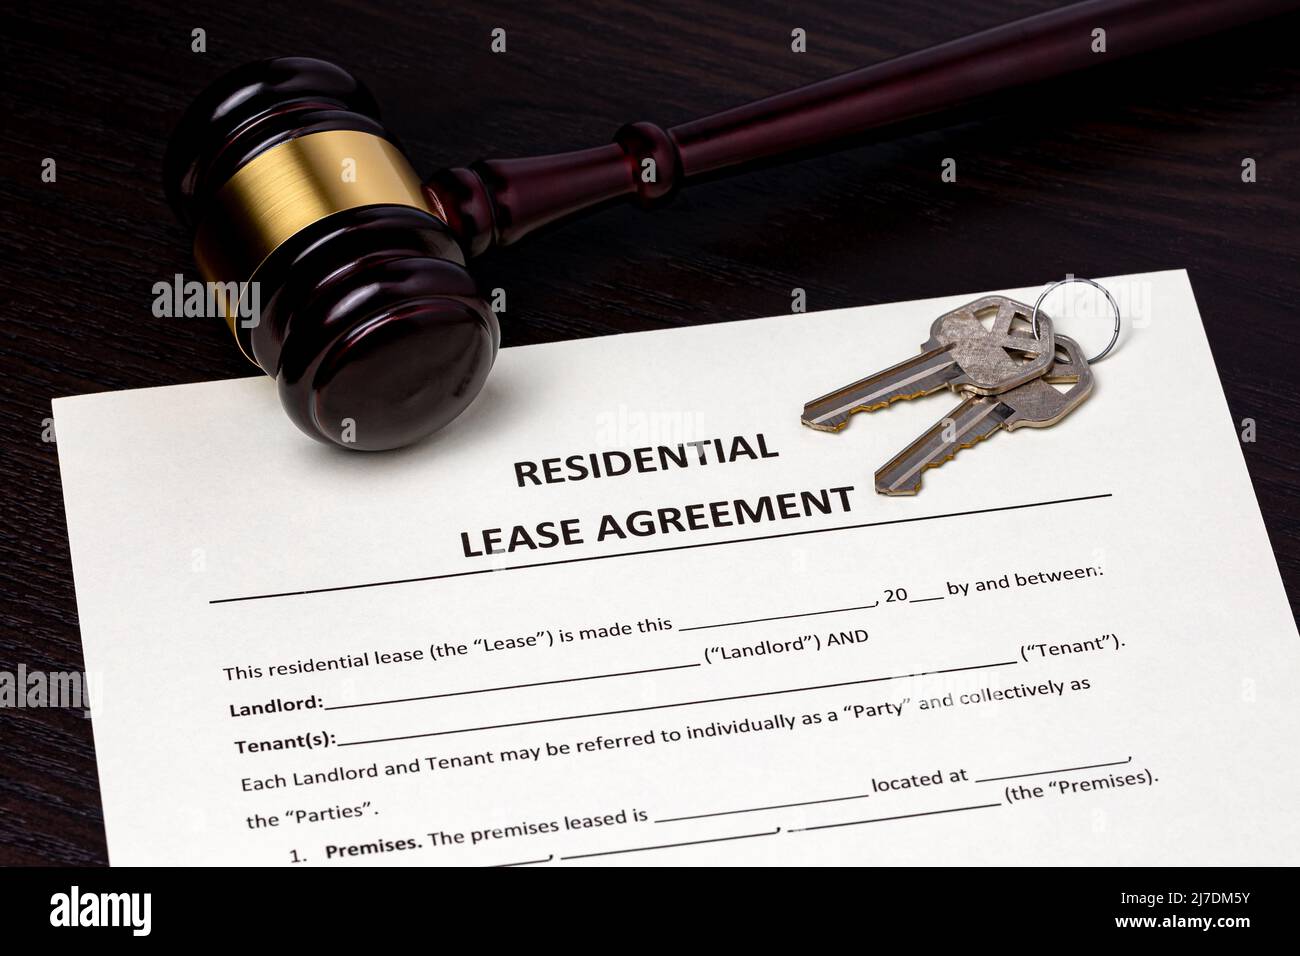 Residential lease agreement contract and gavel. Real estate law and rental dispute concept Stock Photo